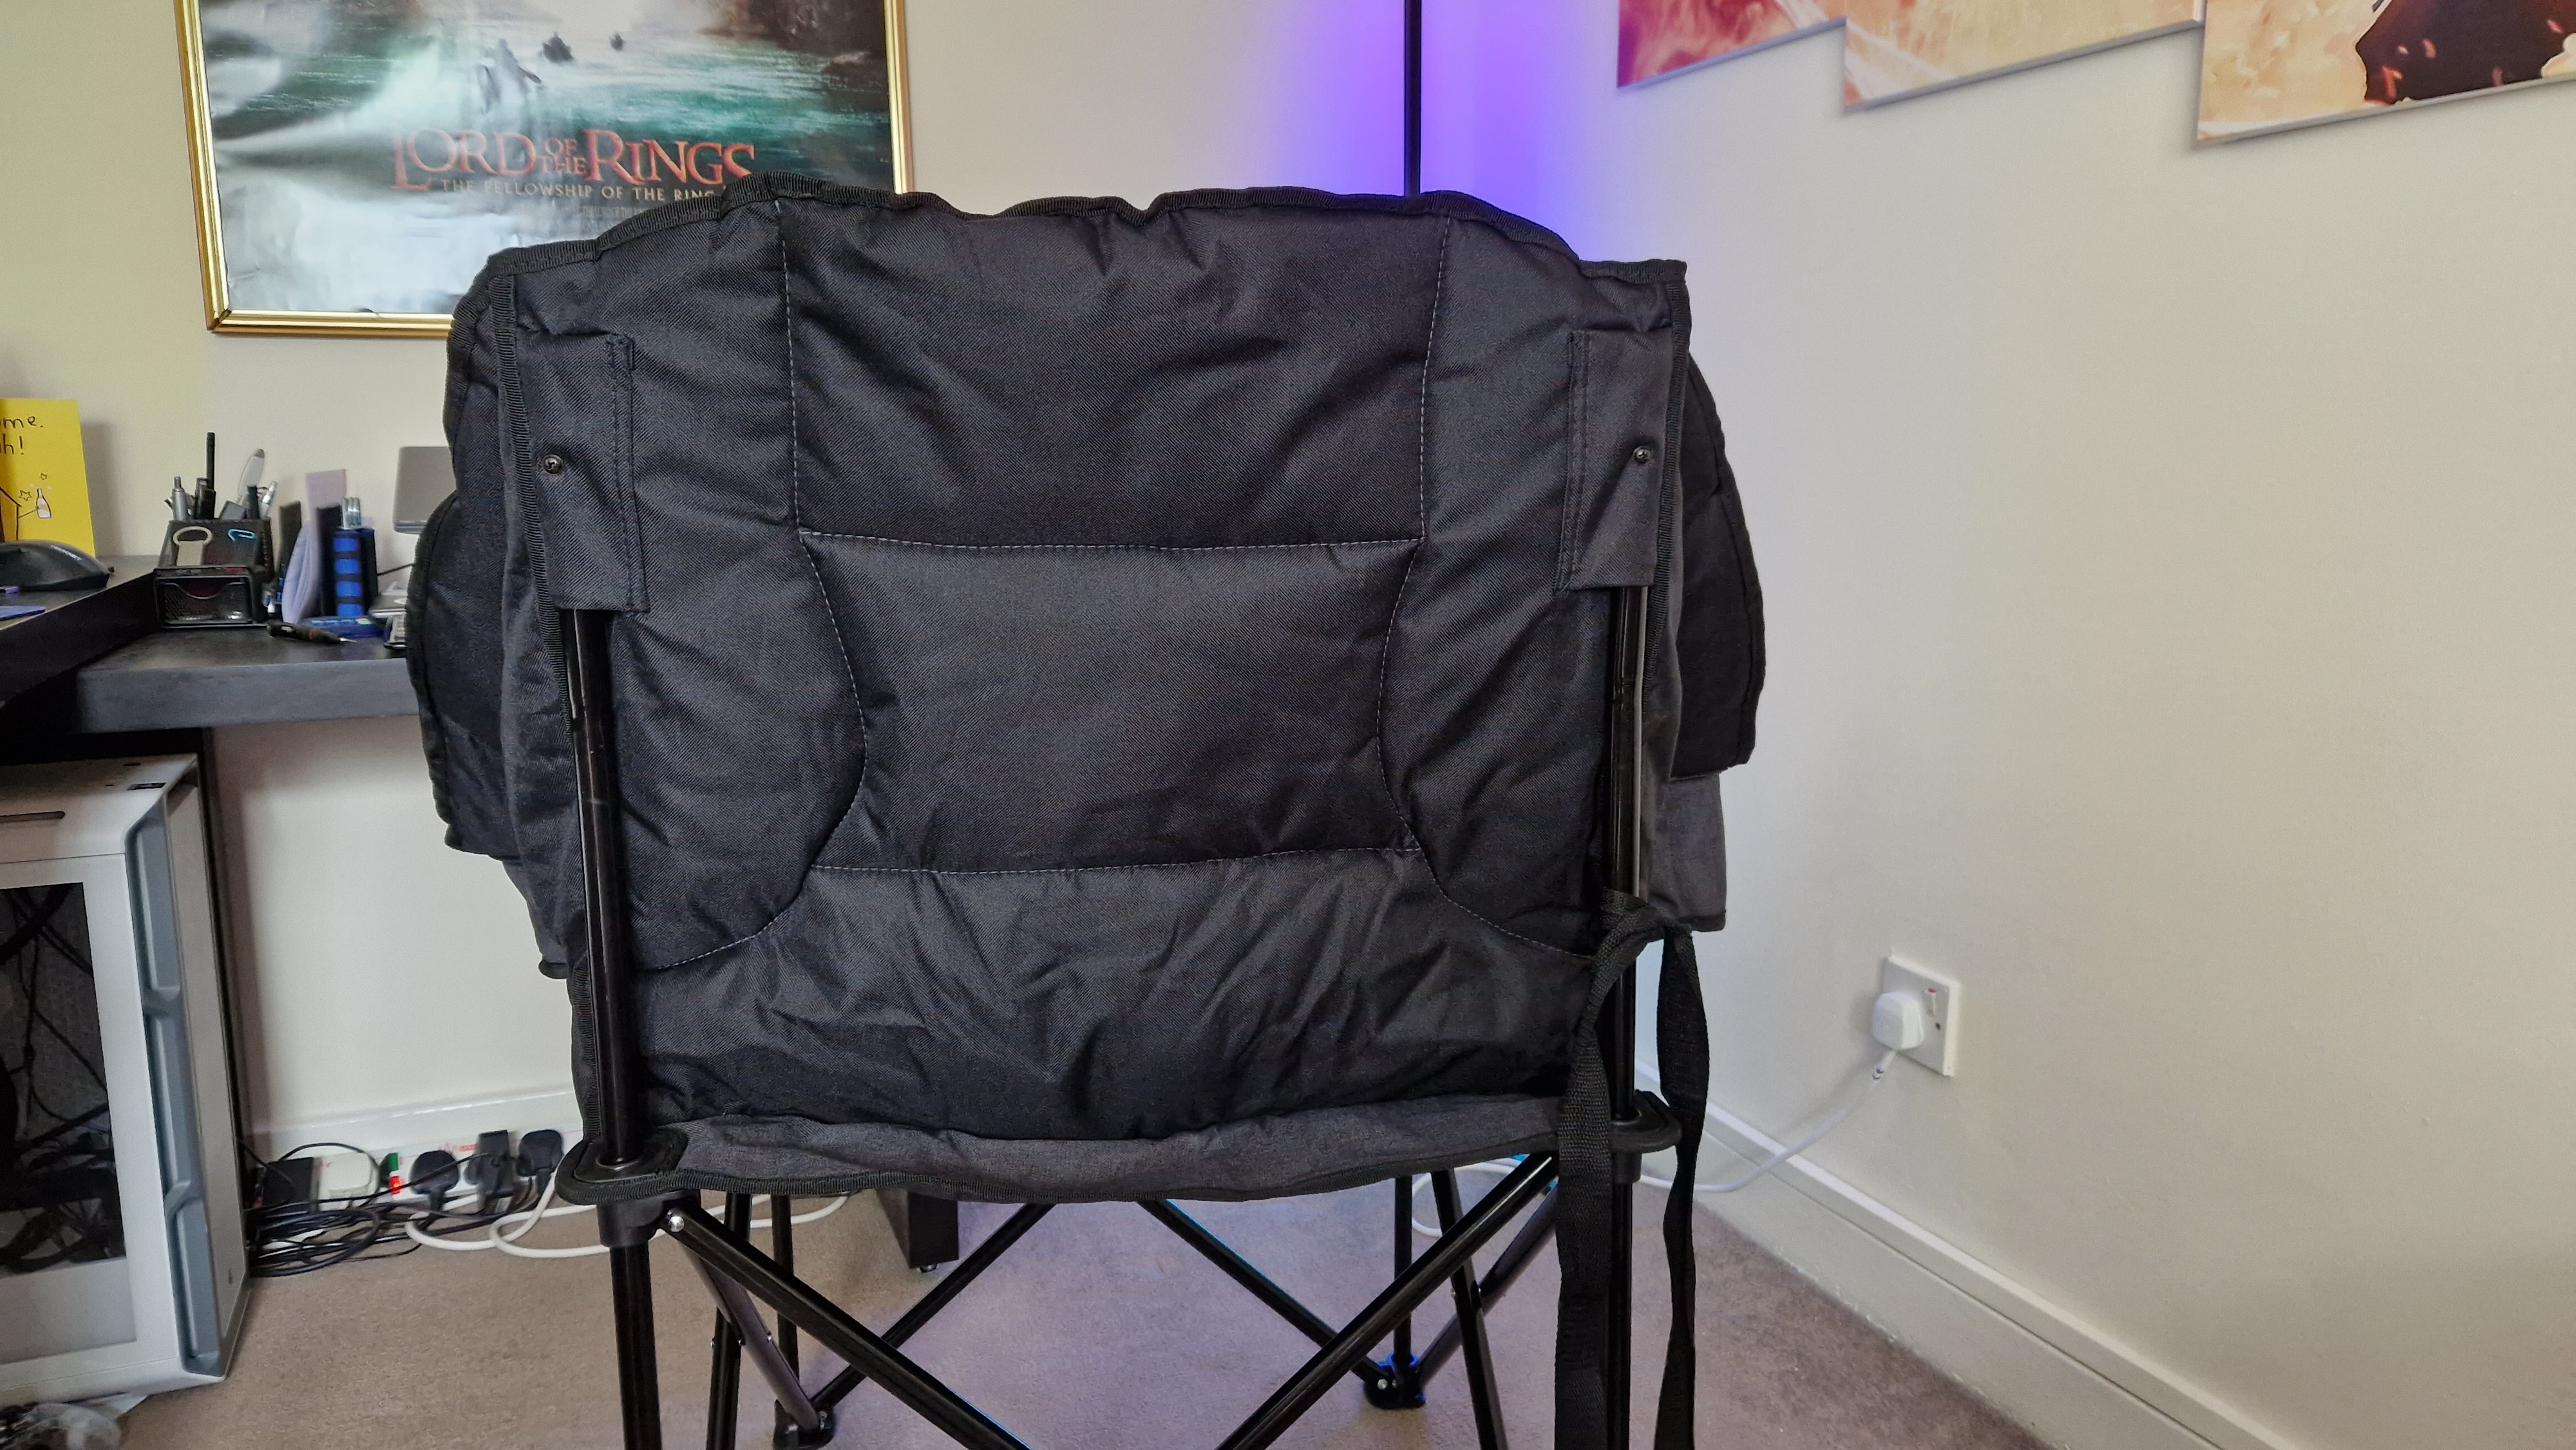 The Foldable Gaming Chair's back, showing the lumbar support and back padding